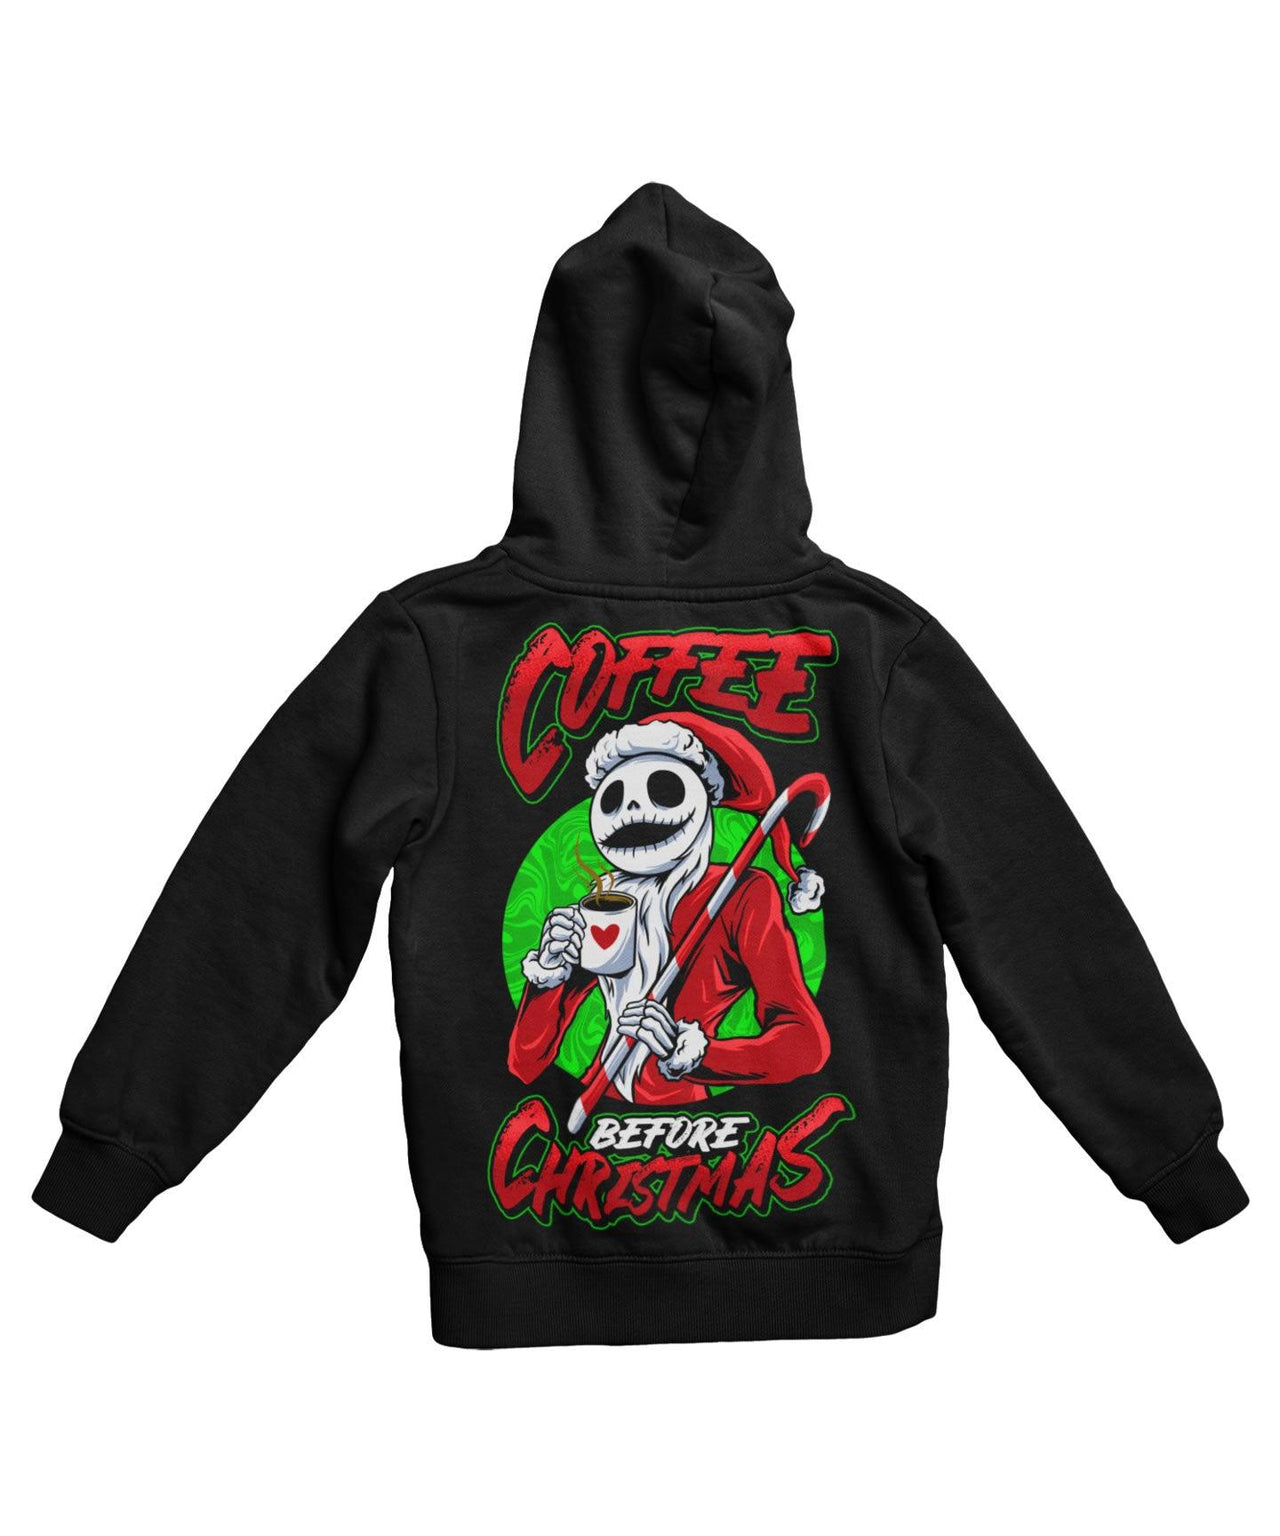 Coffee Before Christmas Back Printed Christmas Hoodie For Men and Women 8Ball